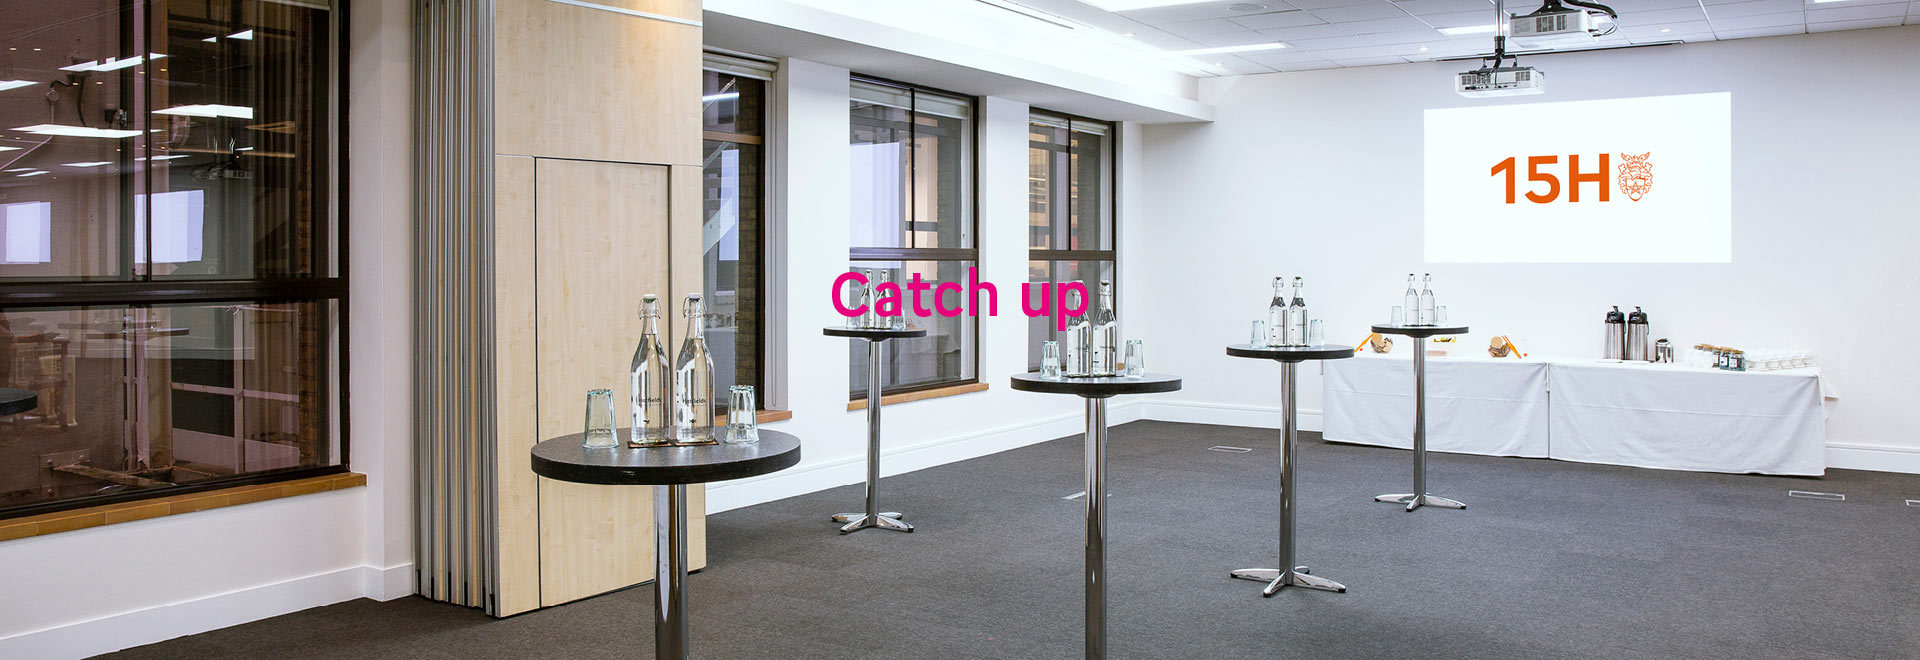 15Hatfields room with poseur tables with the words 'Catch up'